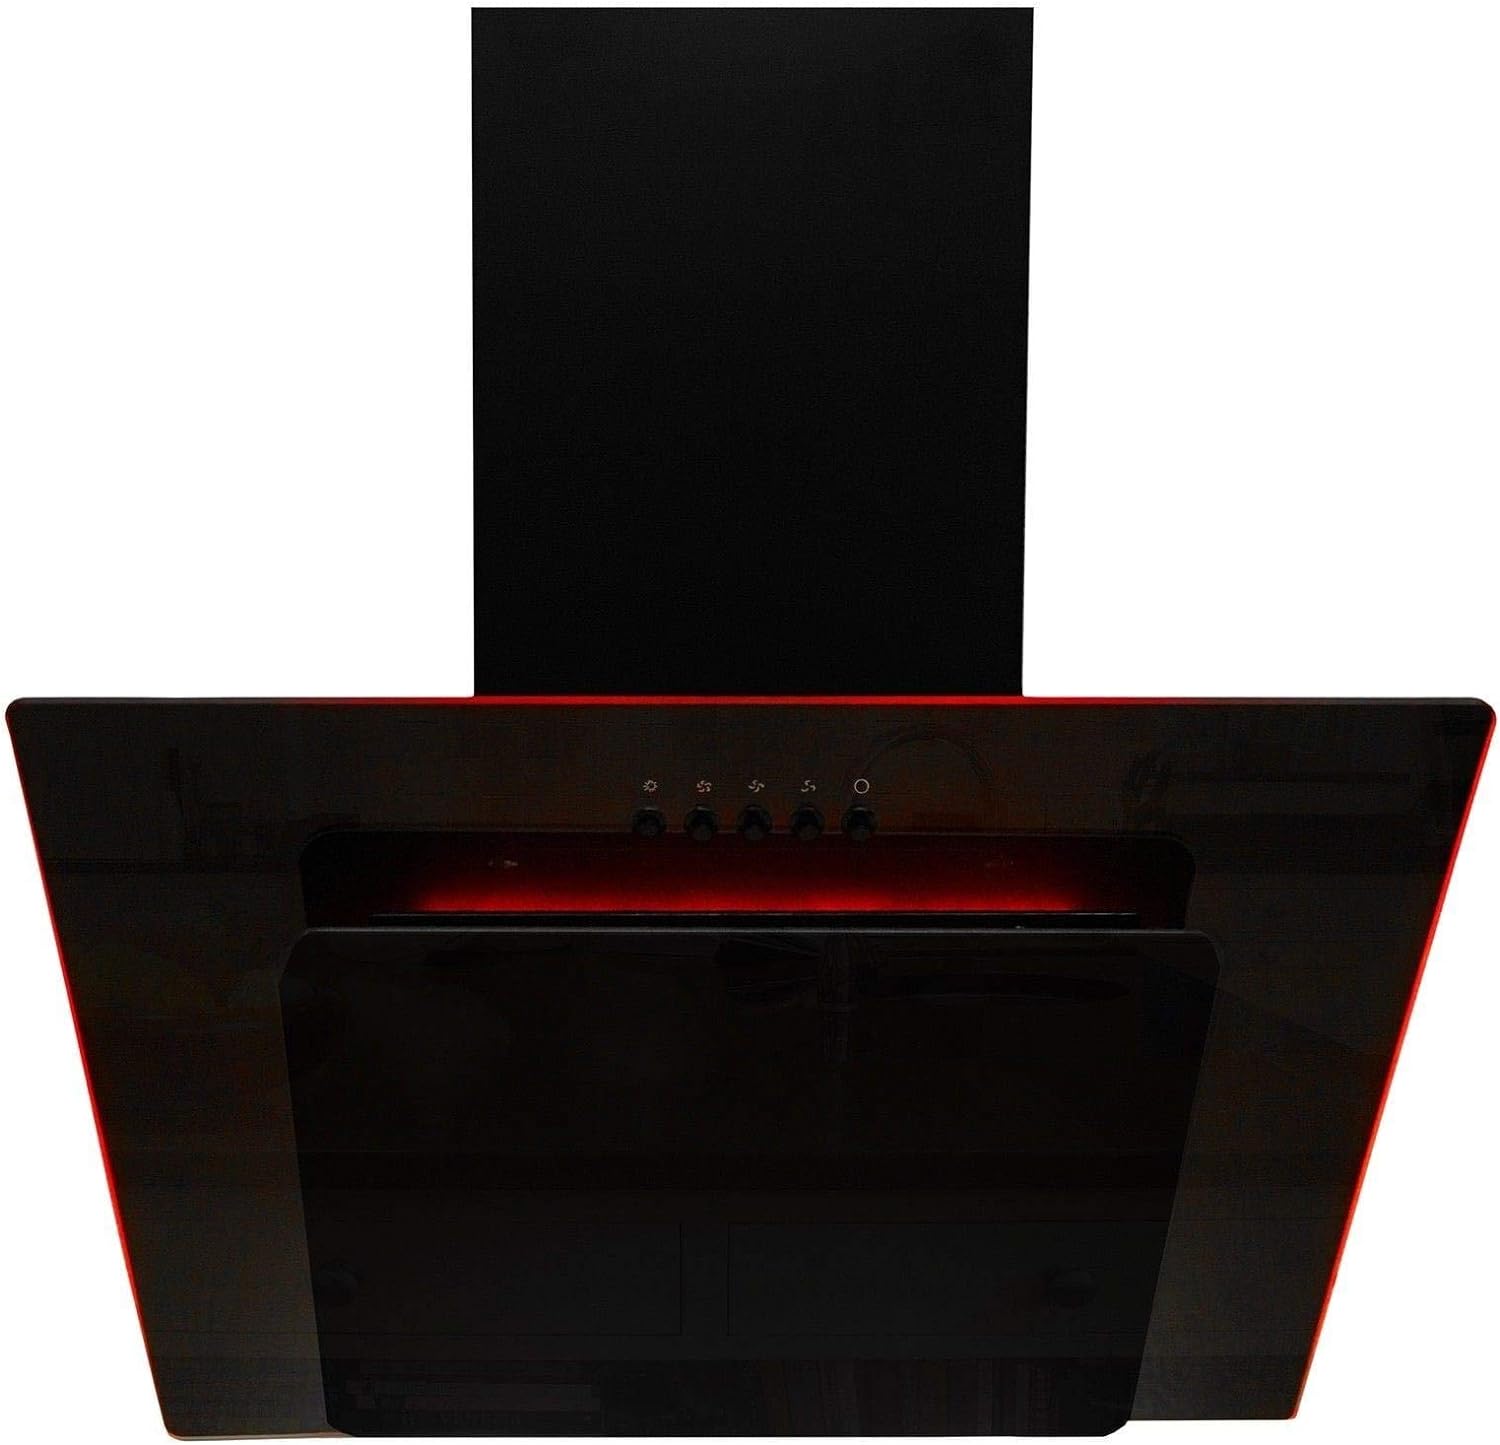 SIA AGE61BL 60cm Black Glass Angled Kitchen Cooker Hood Chimney Extractor Fan With Red Blue And Green LED Edge Lit Mood Lighting - Amazing Gadgets Outlet